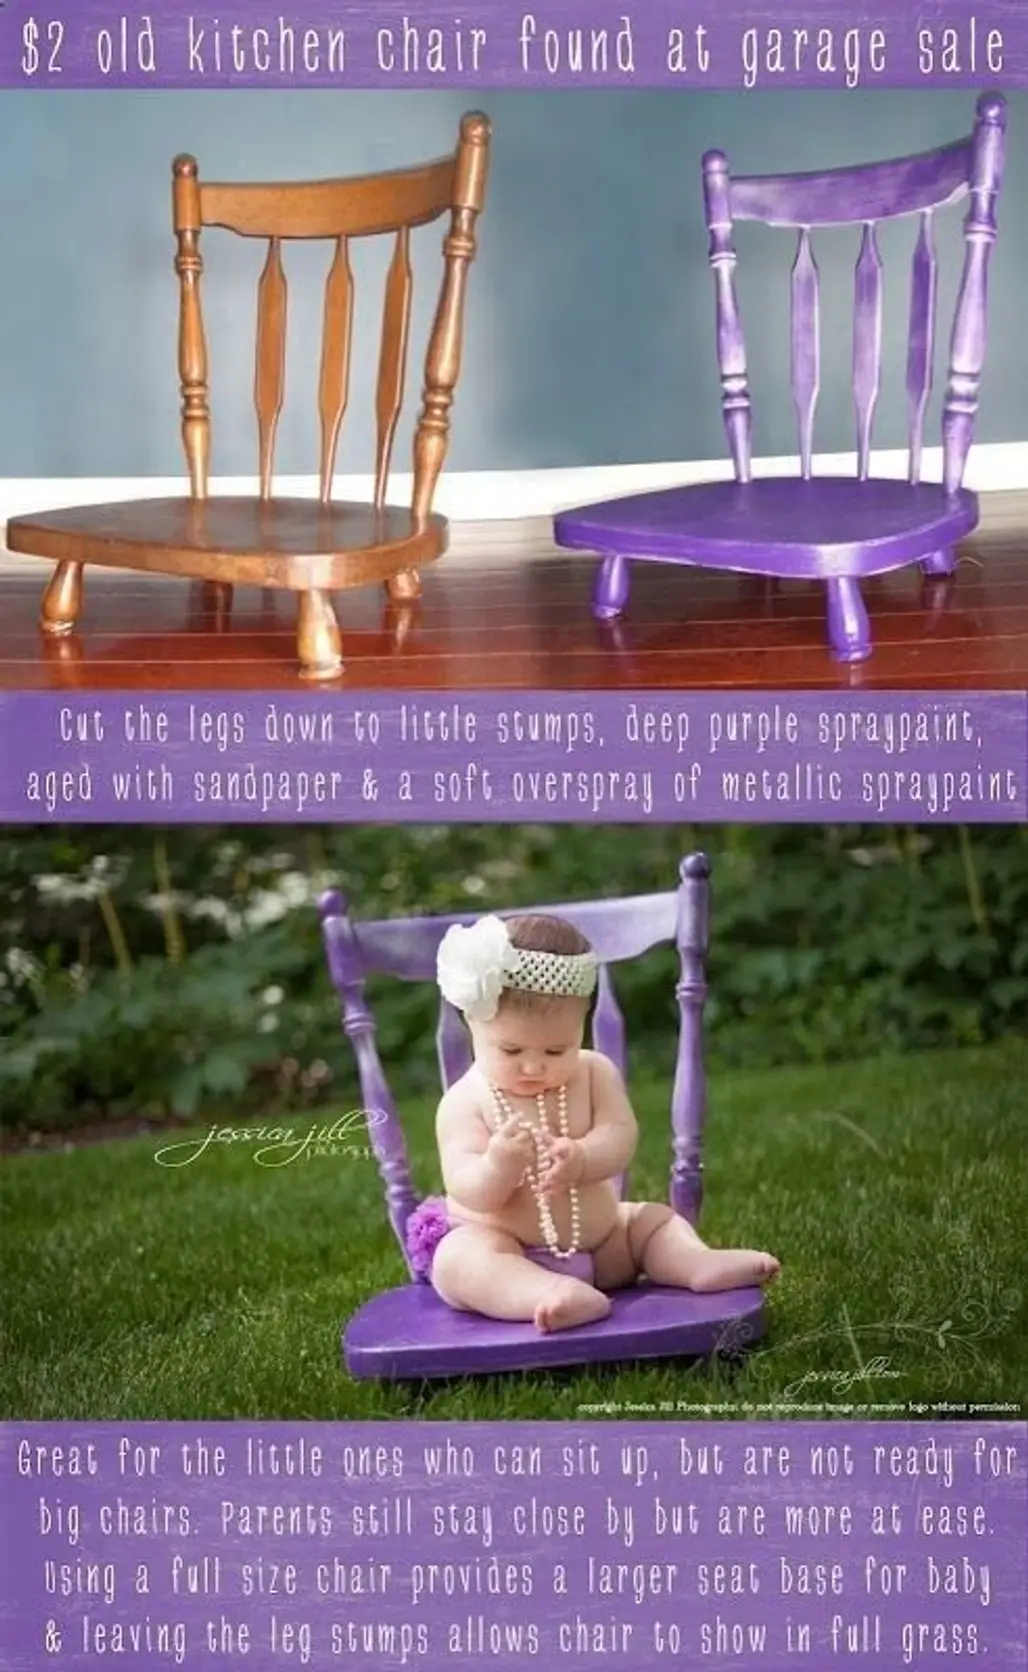 Baby-safe Chair